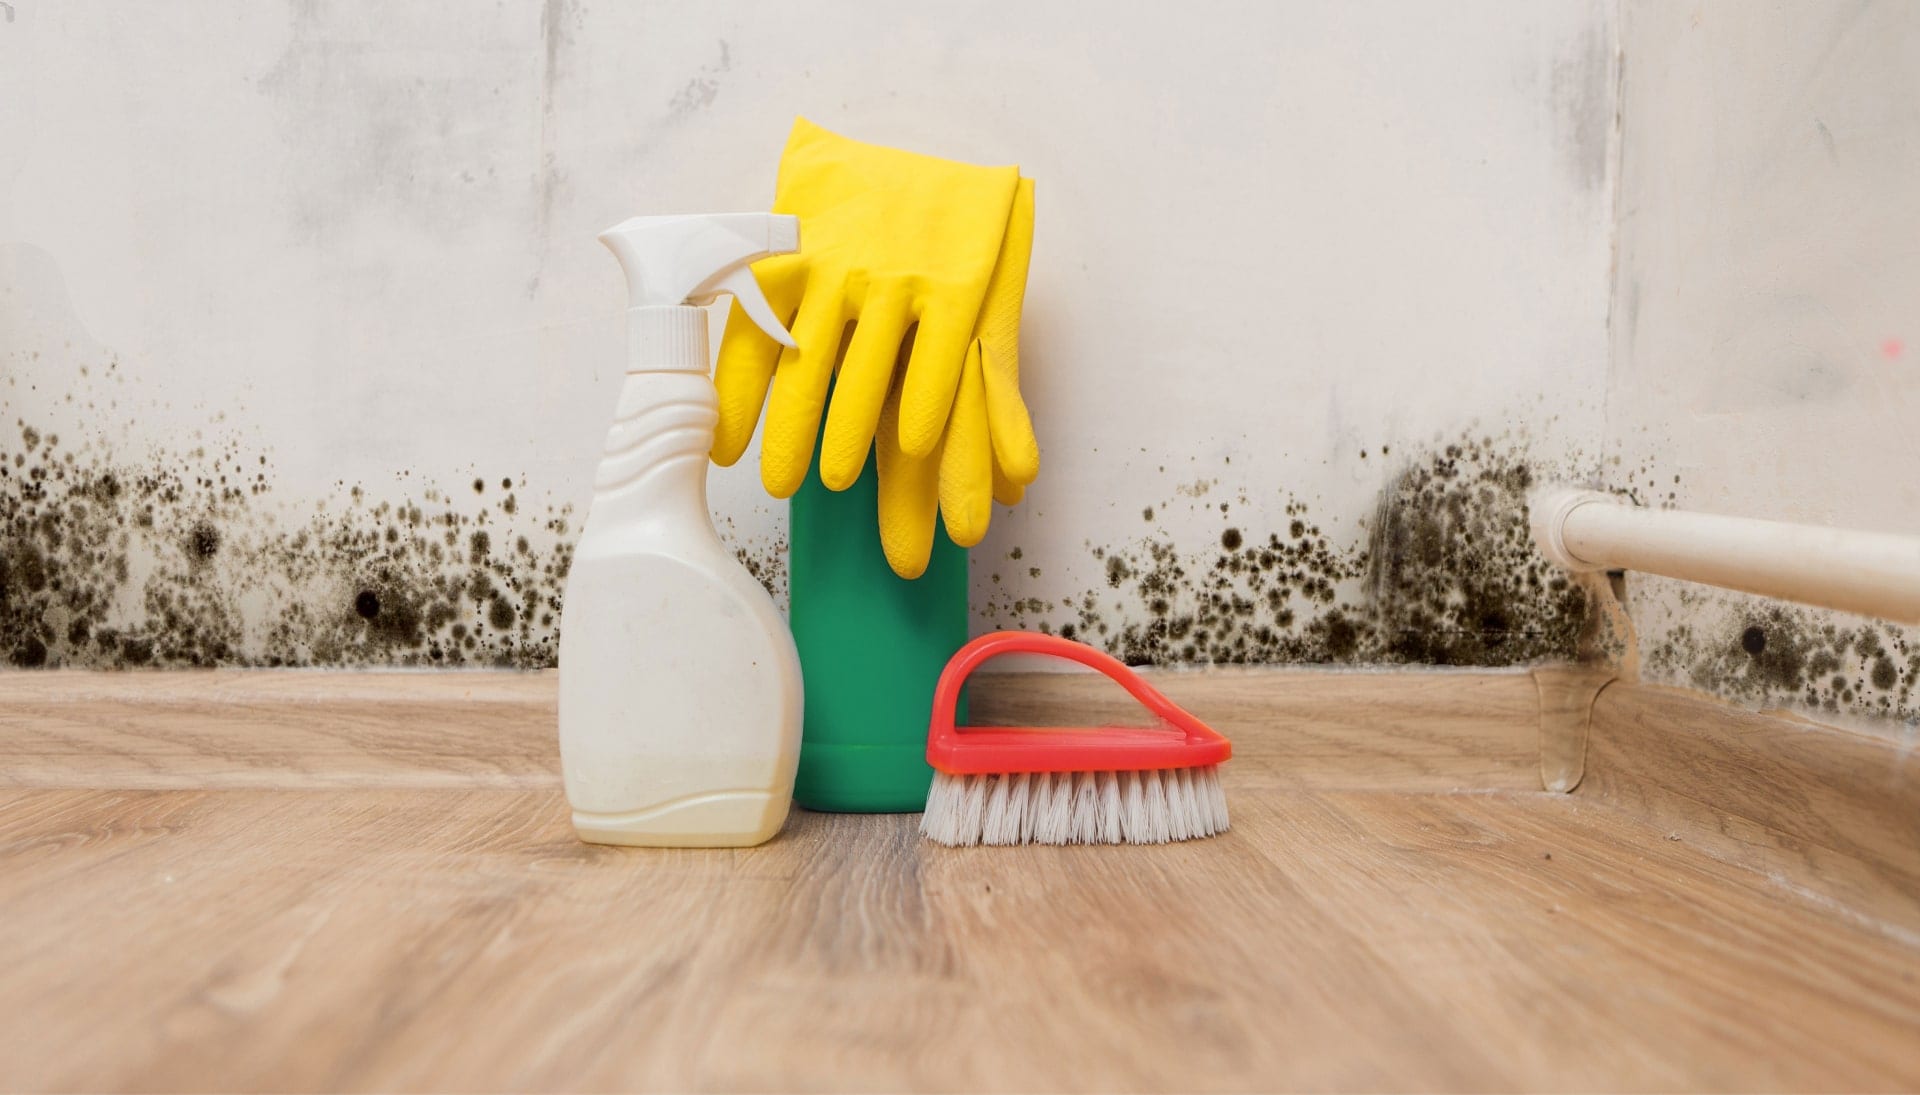 We offer fast and reliable services to help remove and prevent mold growth in your home or business in Aurora, Colorado